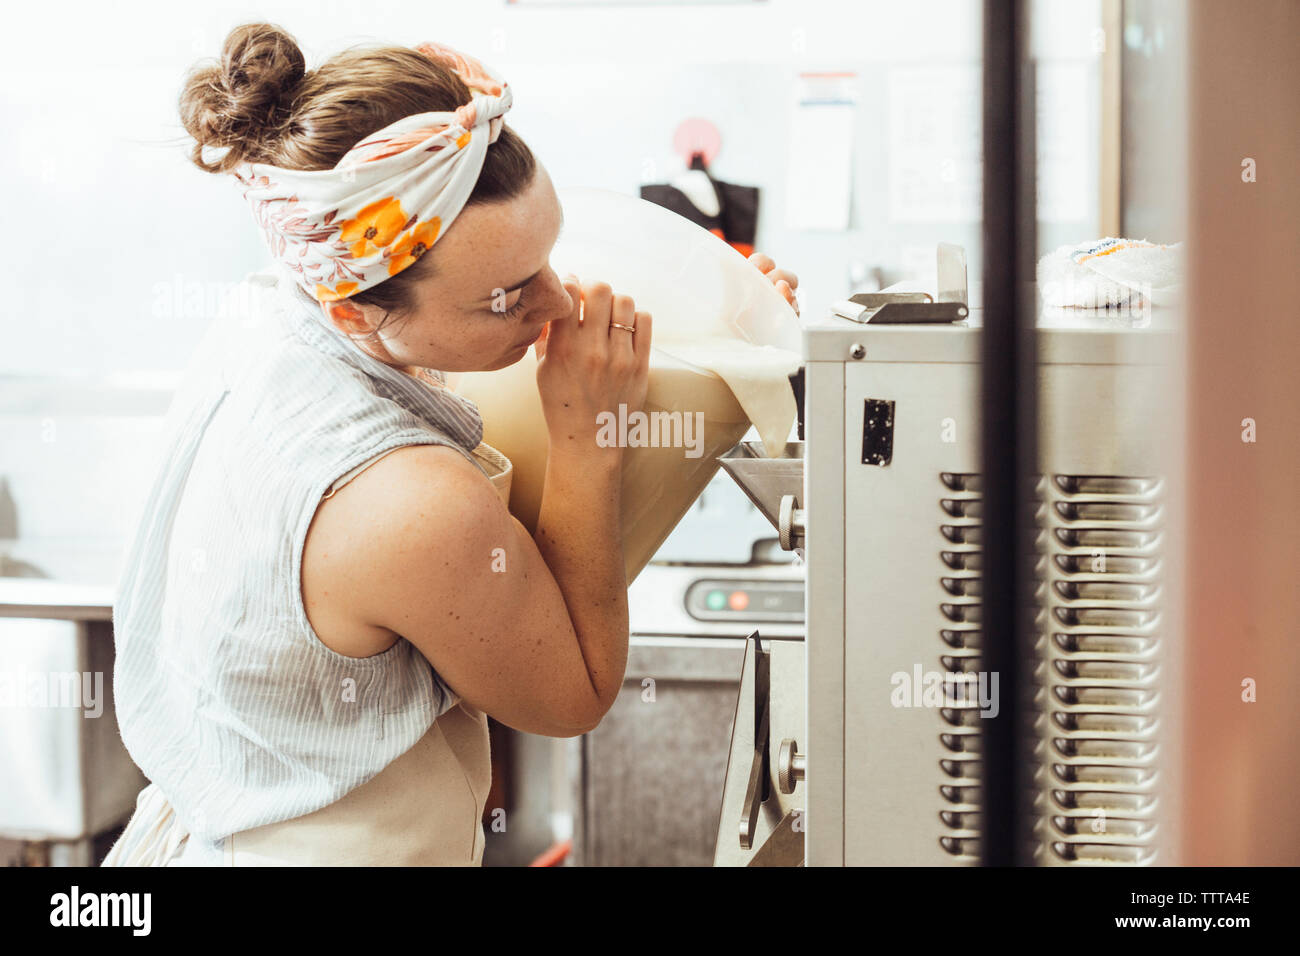 Woman pouring ingredients in ice cream maker at commercial kitchen Stock Photo